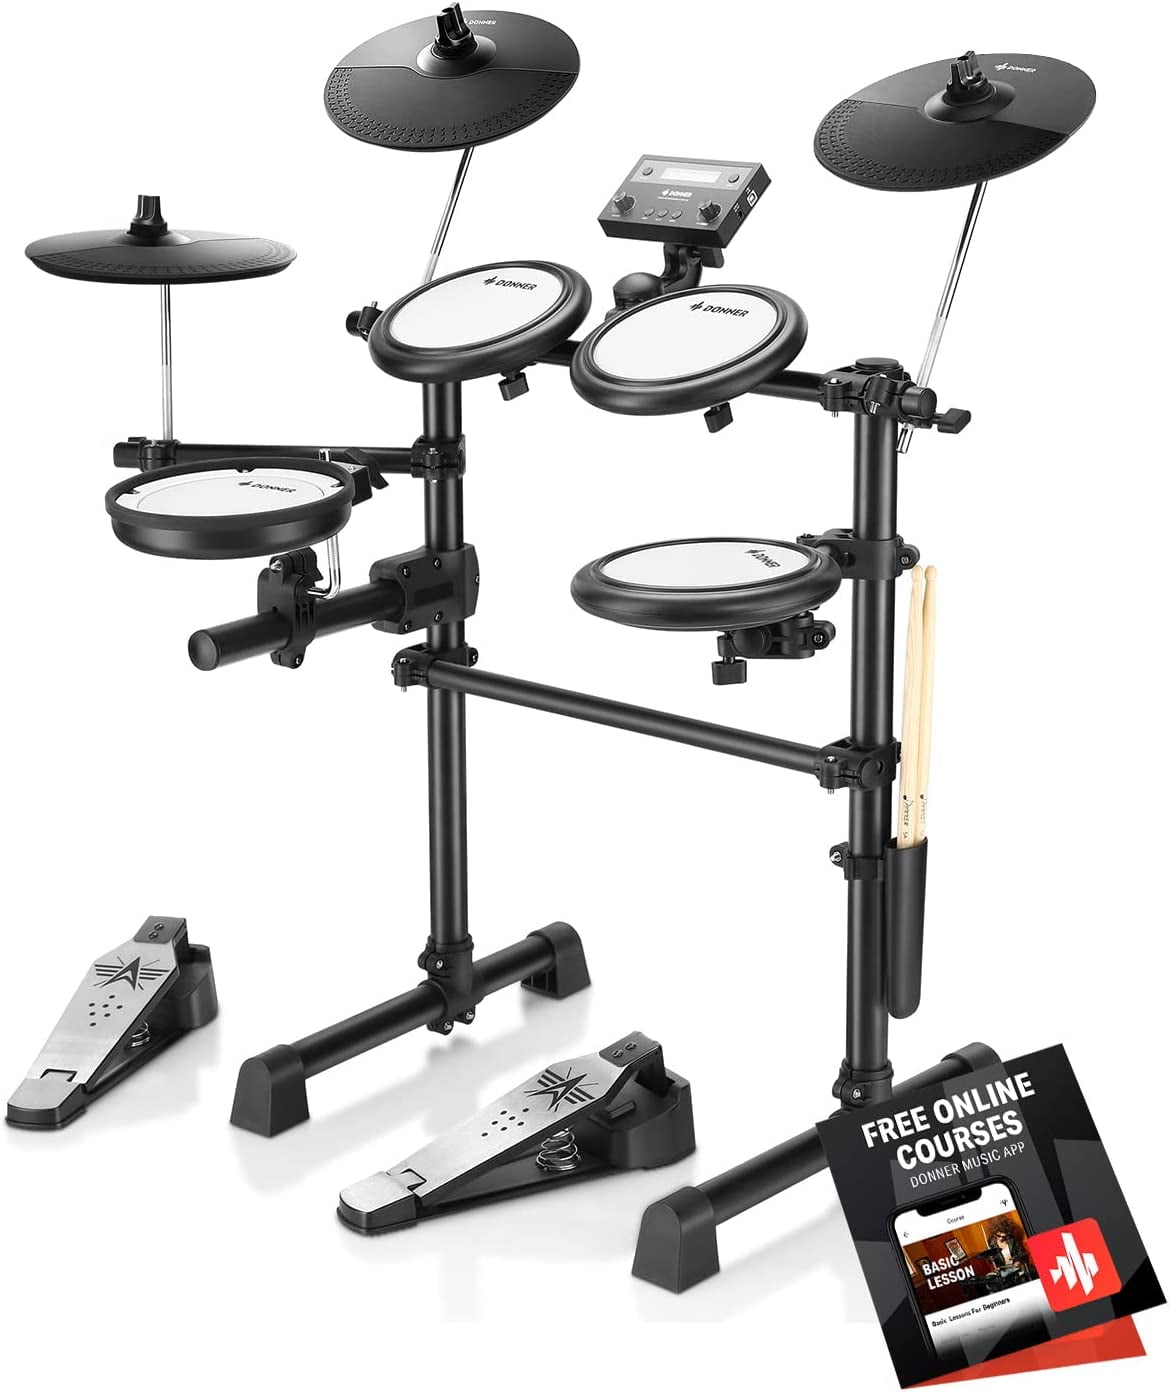 Donner Electronic Drum Sets for Beginner, with 272 Sounds, 4 Quiet Mesh Drum Set with Heavy Duty Pedals, Drum Sticks Storage Holder, Light Portable